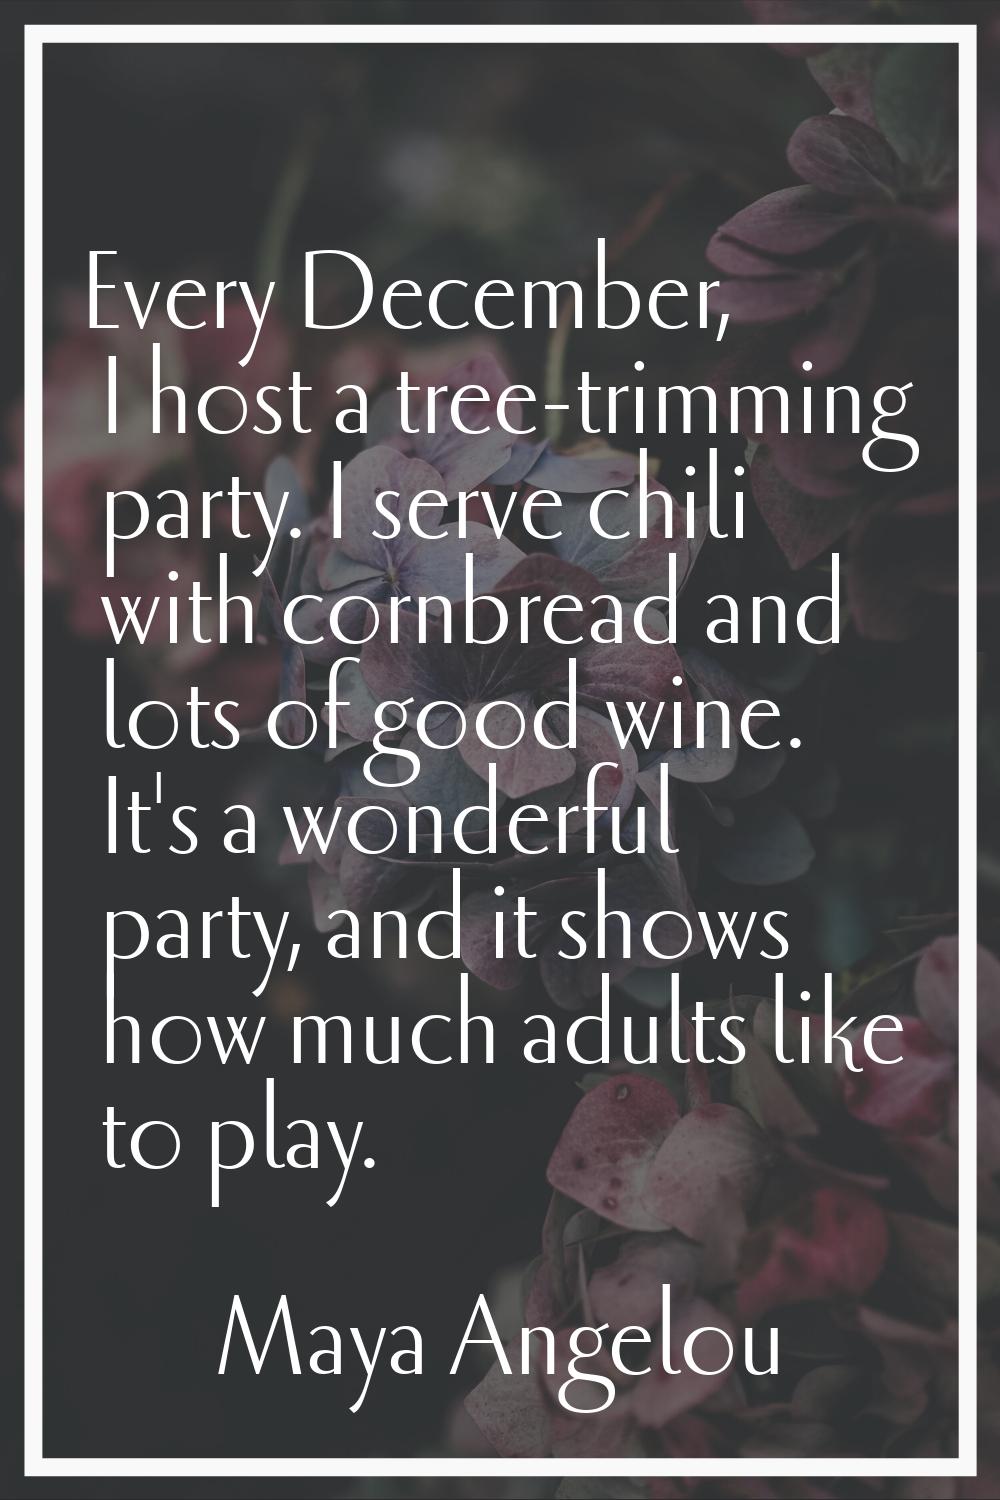 Every December, I host a tree-trimming party. I serve chili with cornbread and lots of good wine. I